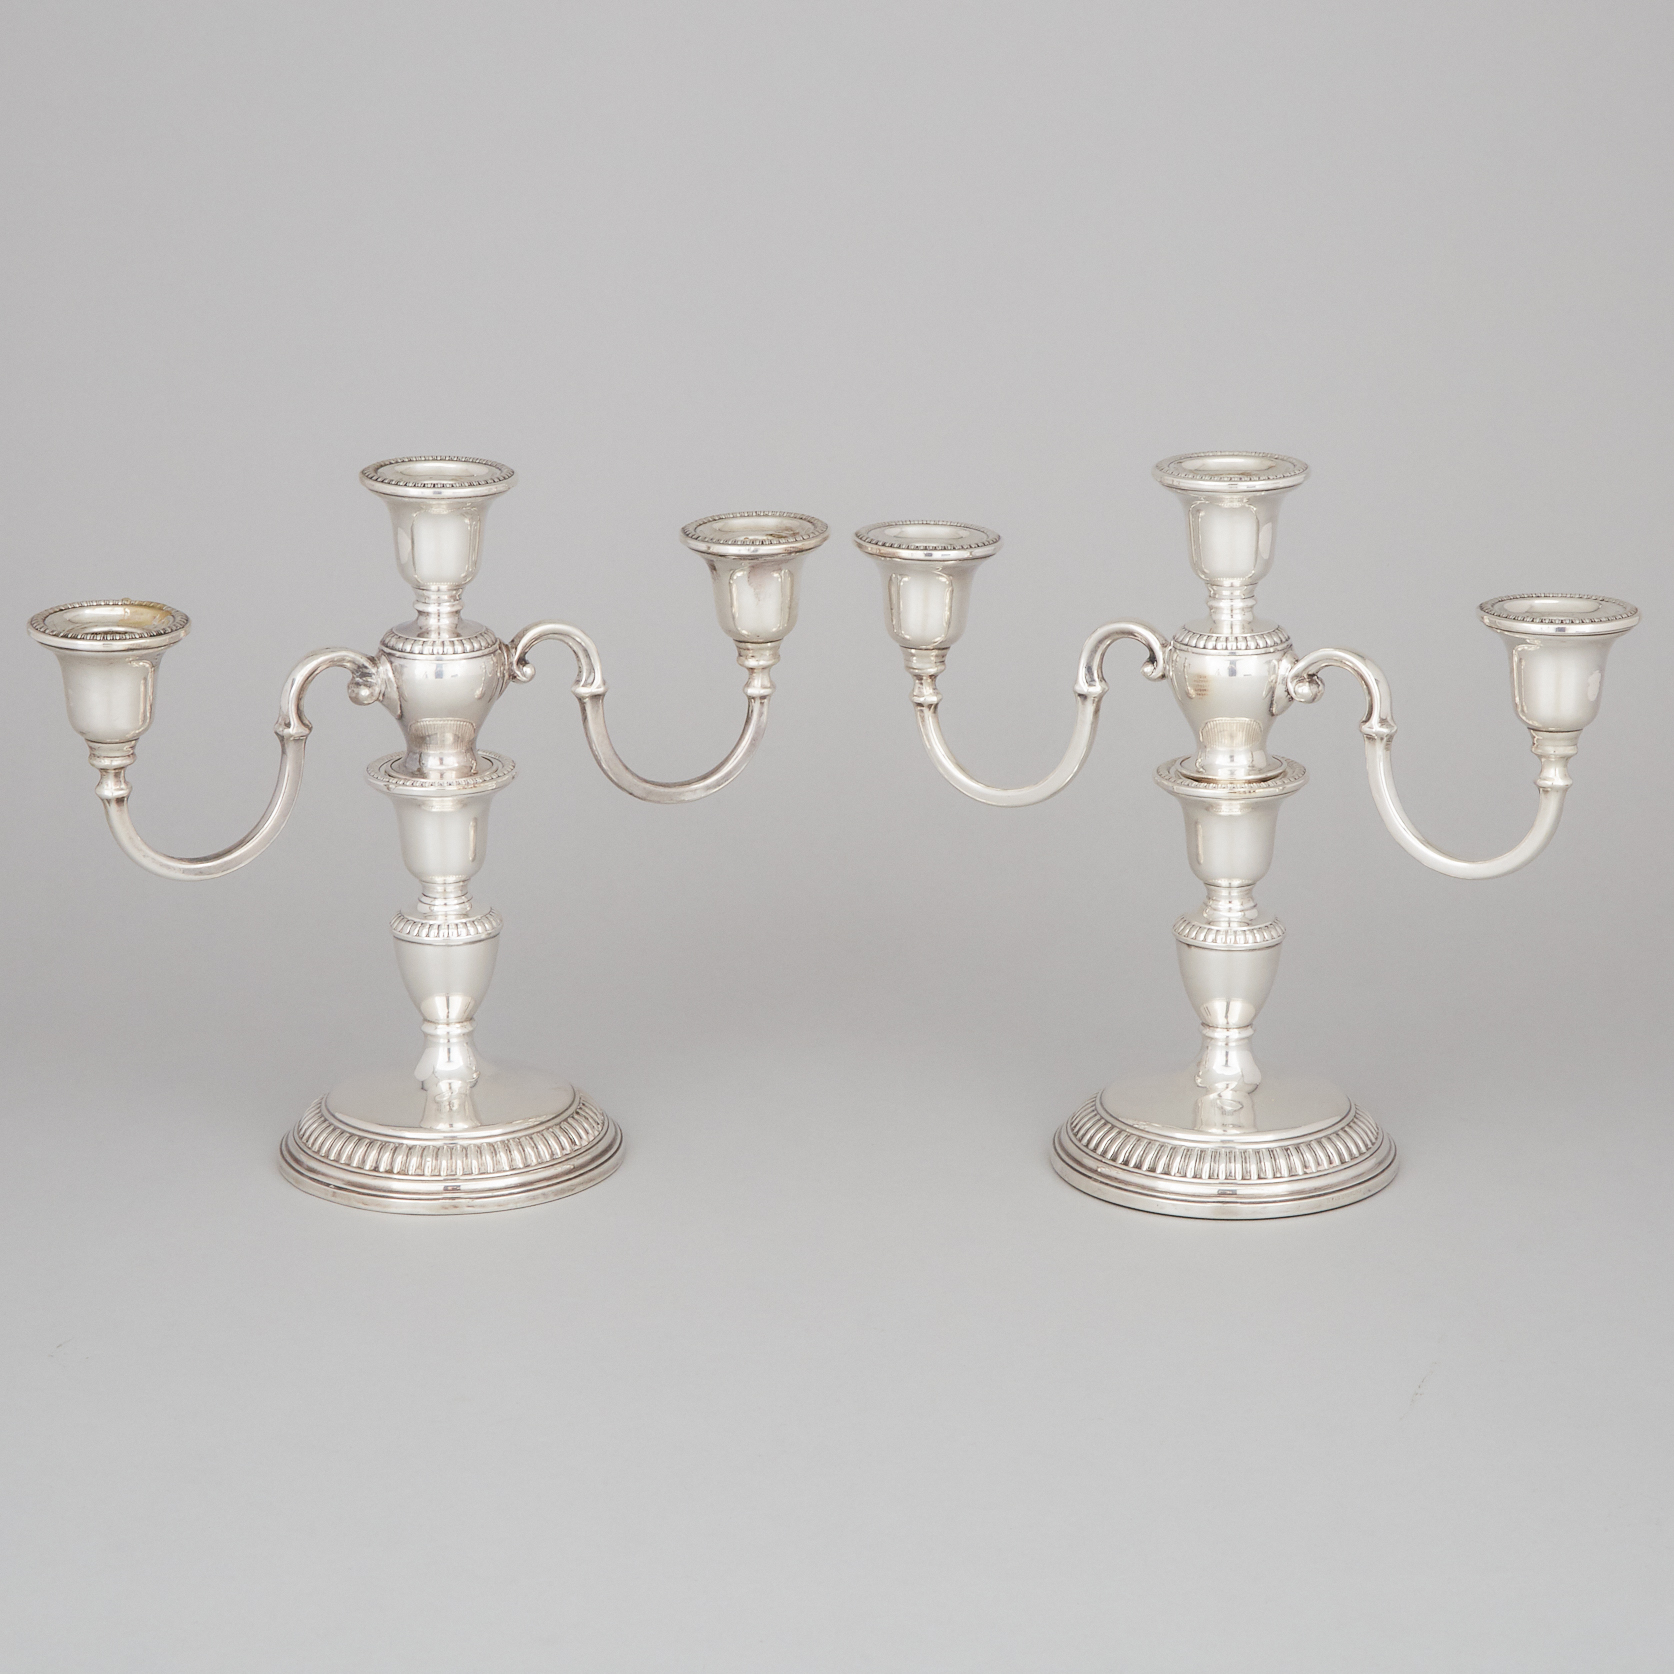 Pair of Canadian Silver Three-Light Candelabra, Henry Birks & Sons, Montreal, Que., 1904-24